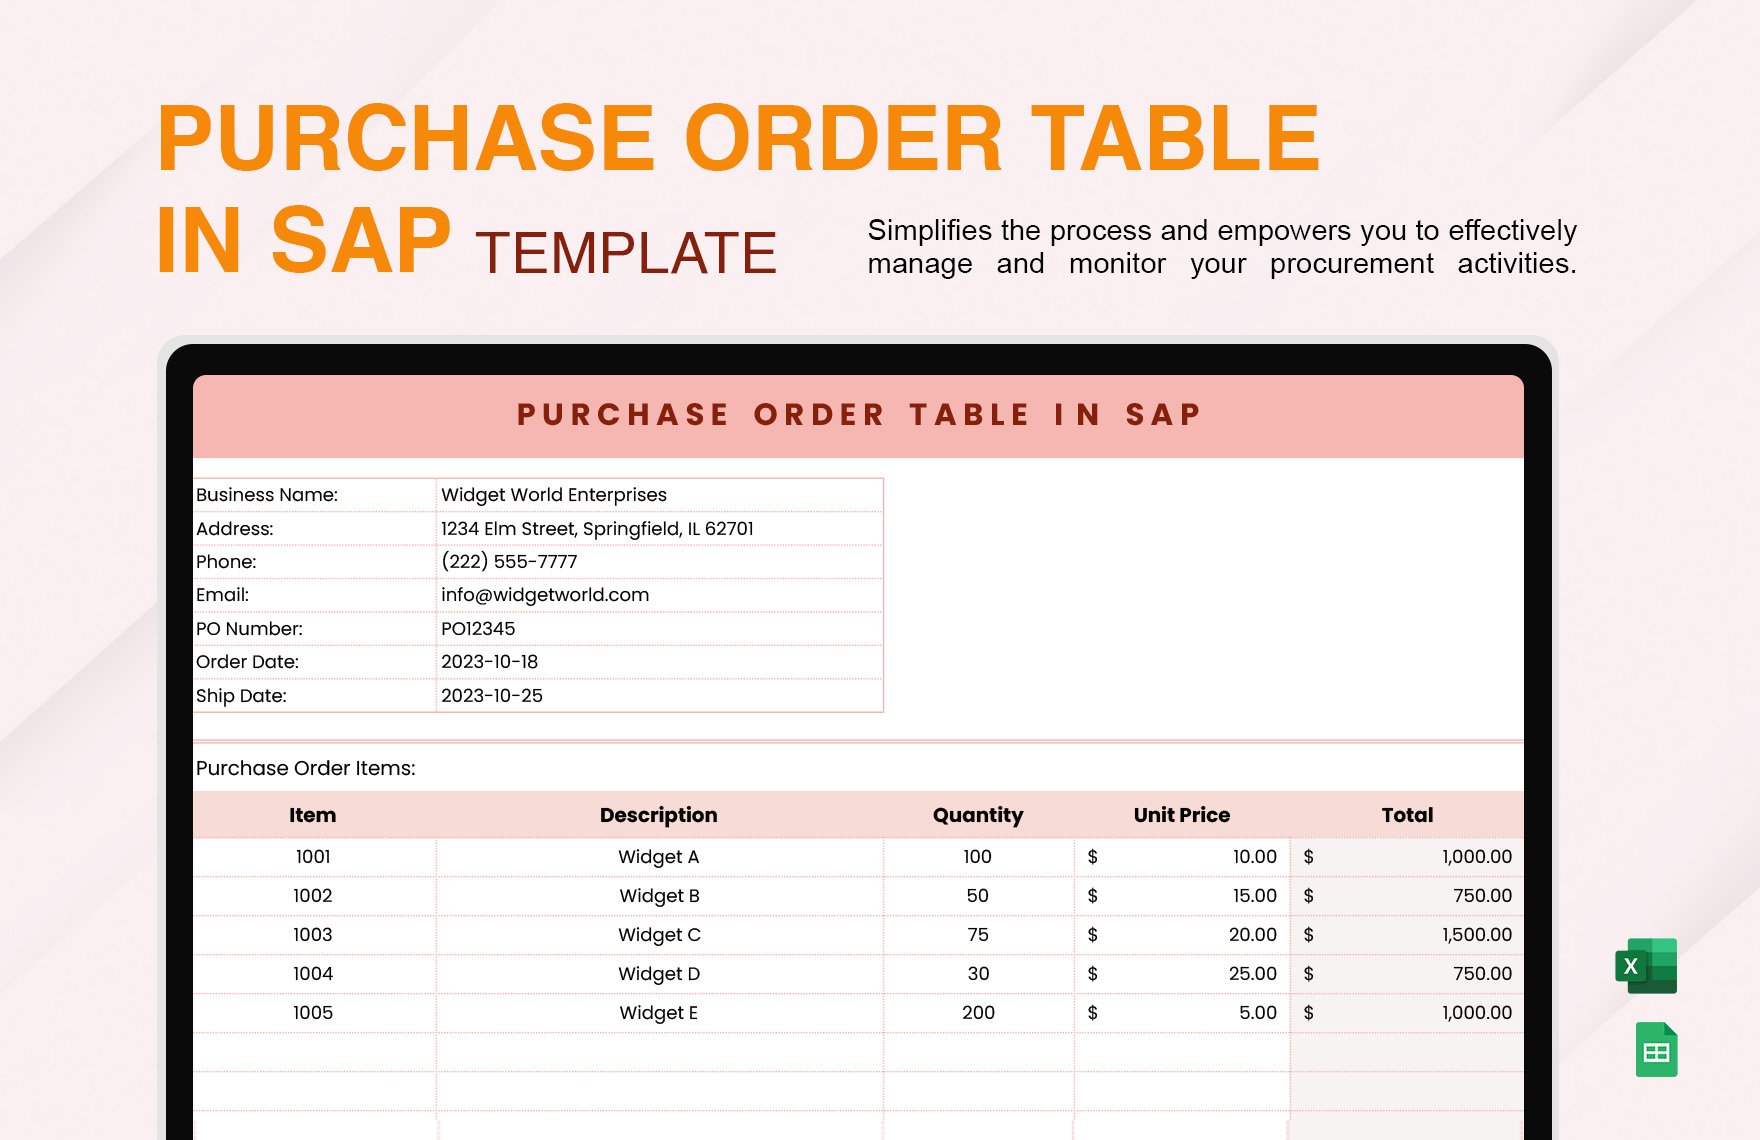 Purchase Order Table in Sap Template